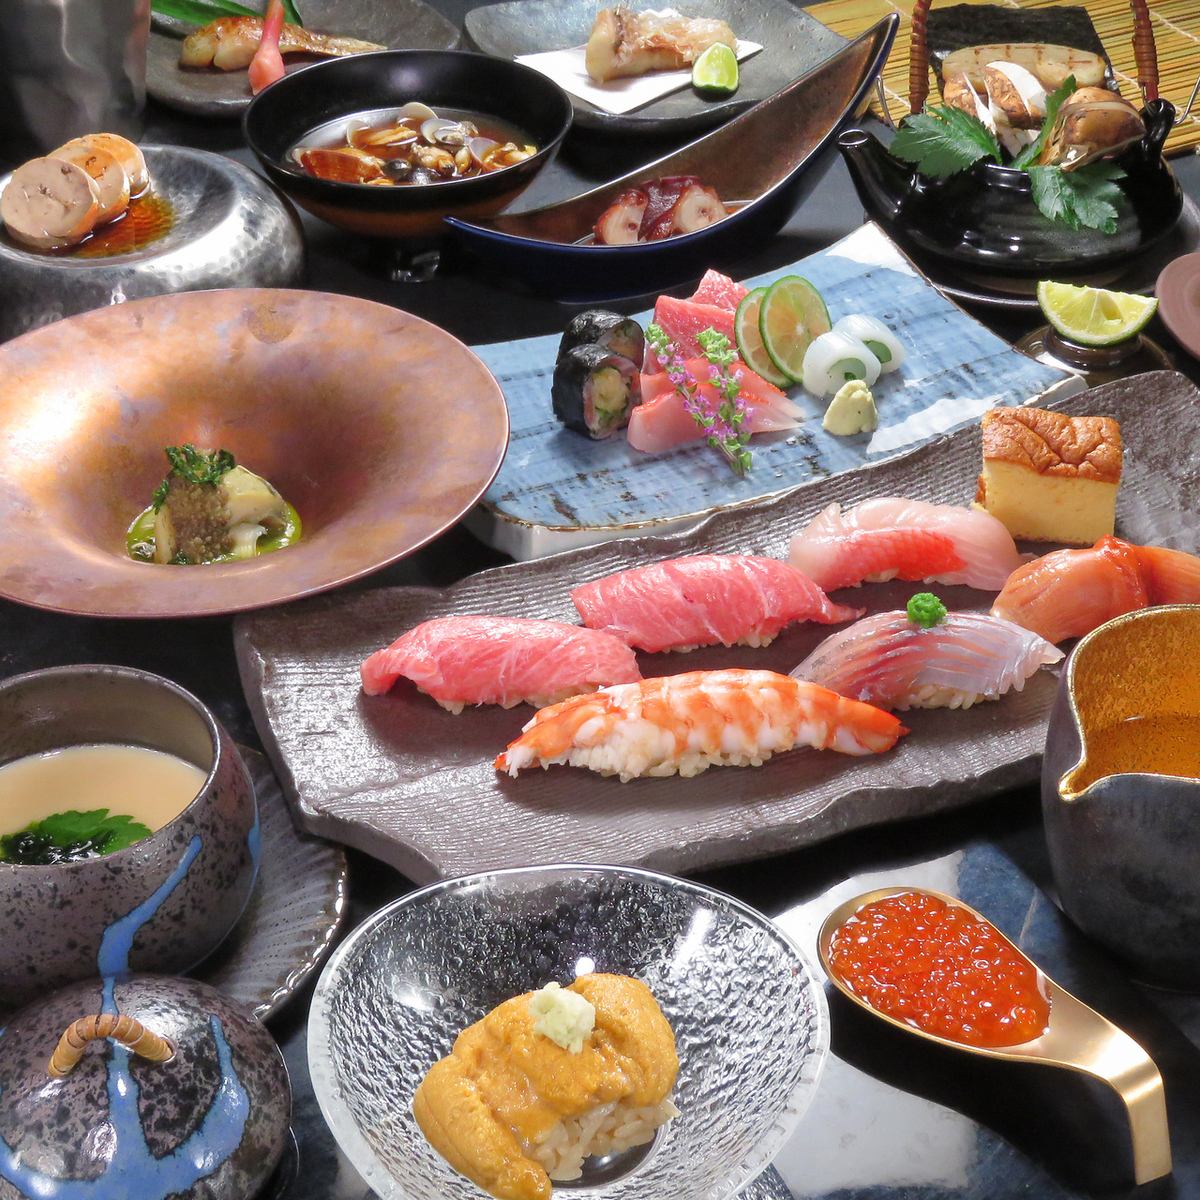 [2 minutes on foot from Shibuya Station] Enjoy high-class authentic sushi! For 15,000 yen, you can enjoy high-quality authentic sushi and all-you-can-drink!